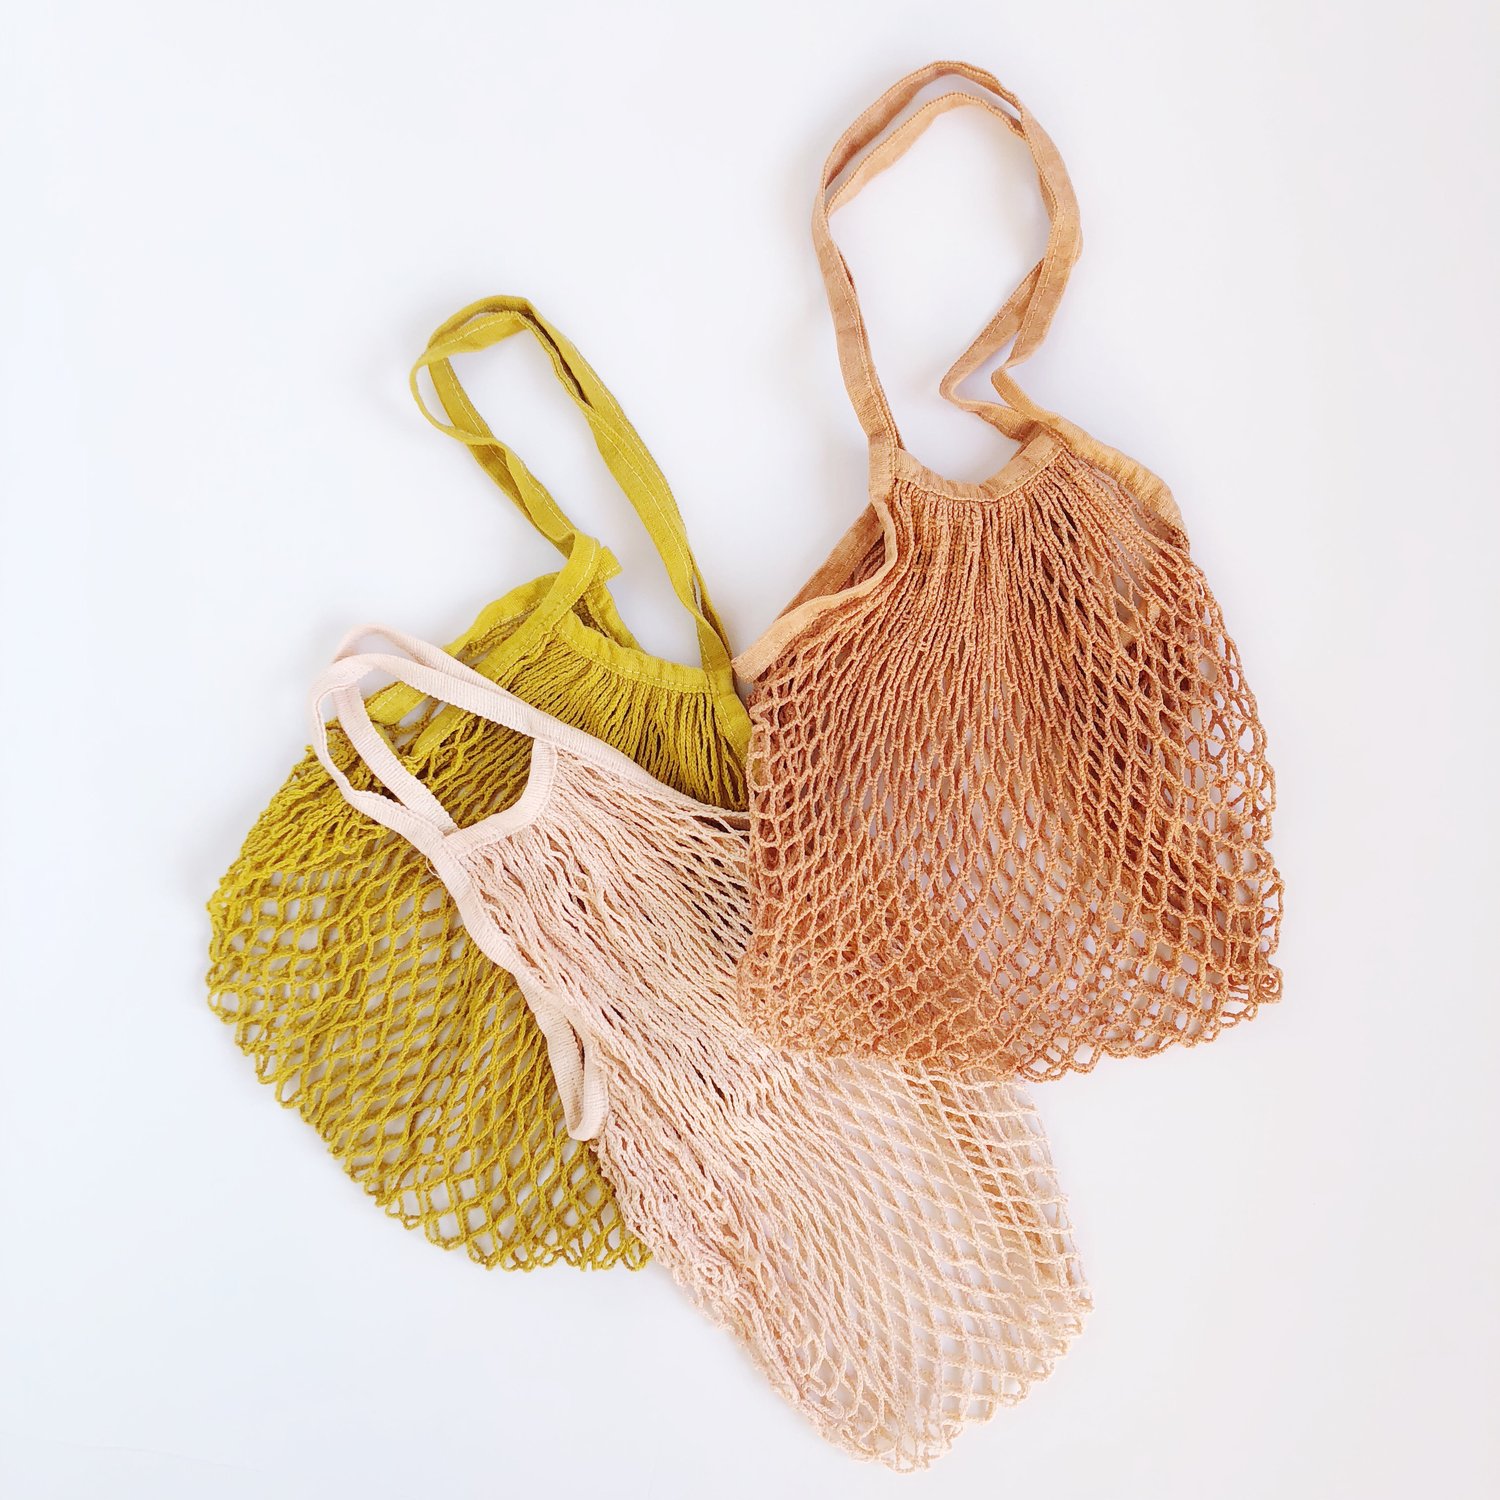 Image of Naturally Dyed Market Bag